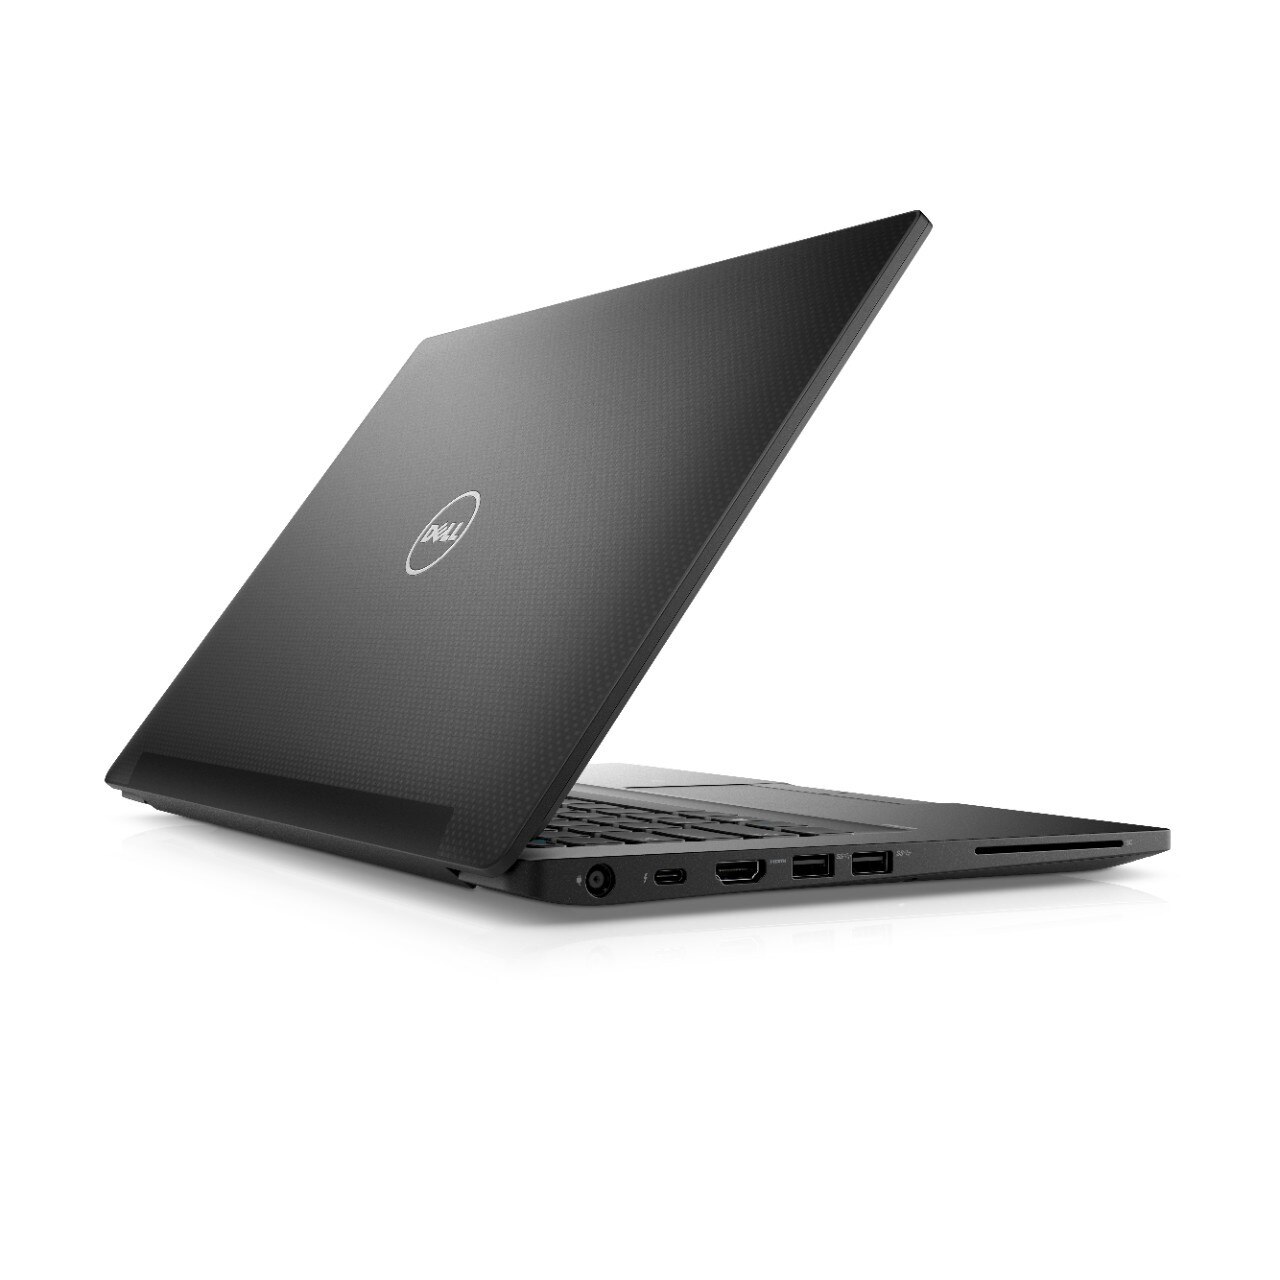 Refurbished Business Laptops And 2 In 1s Dell Outlet Dell United States